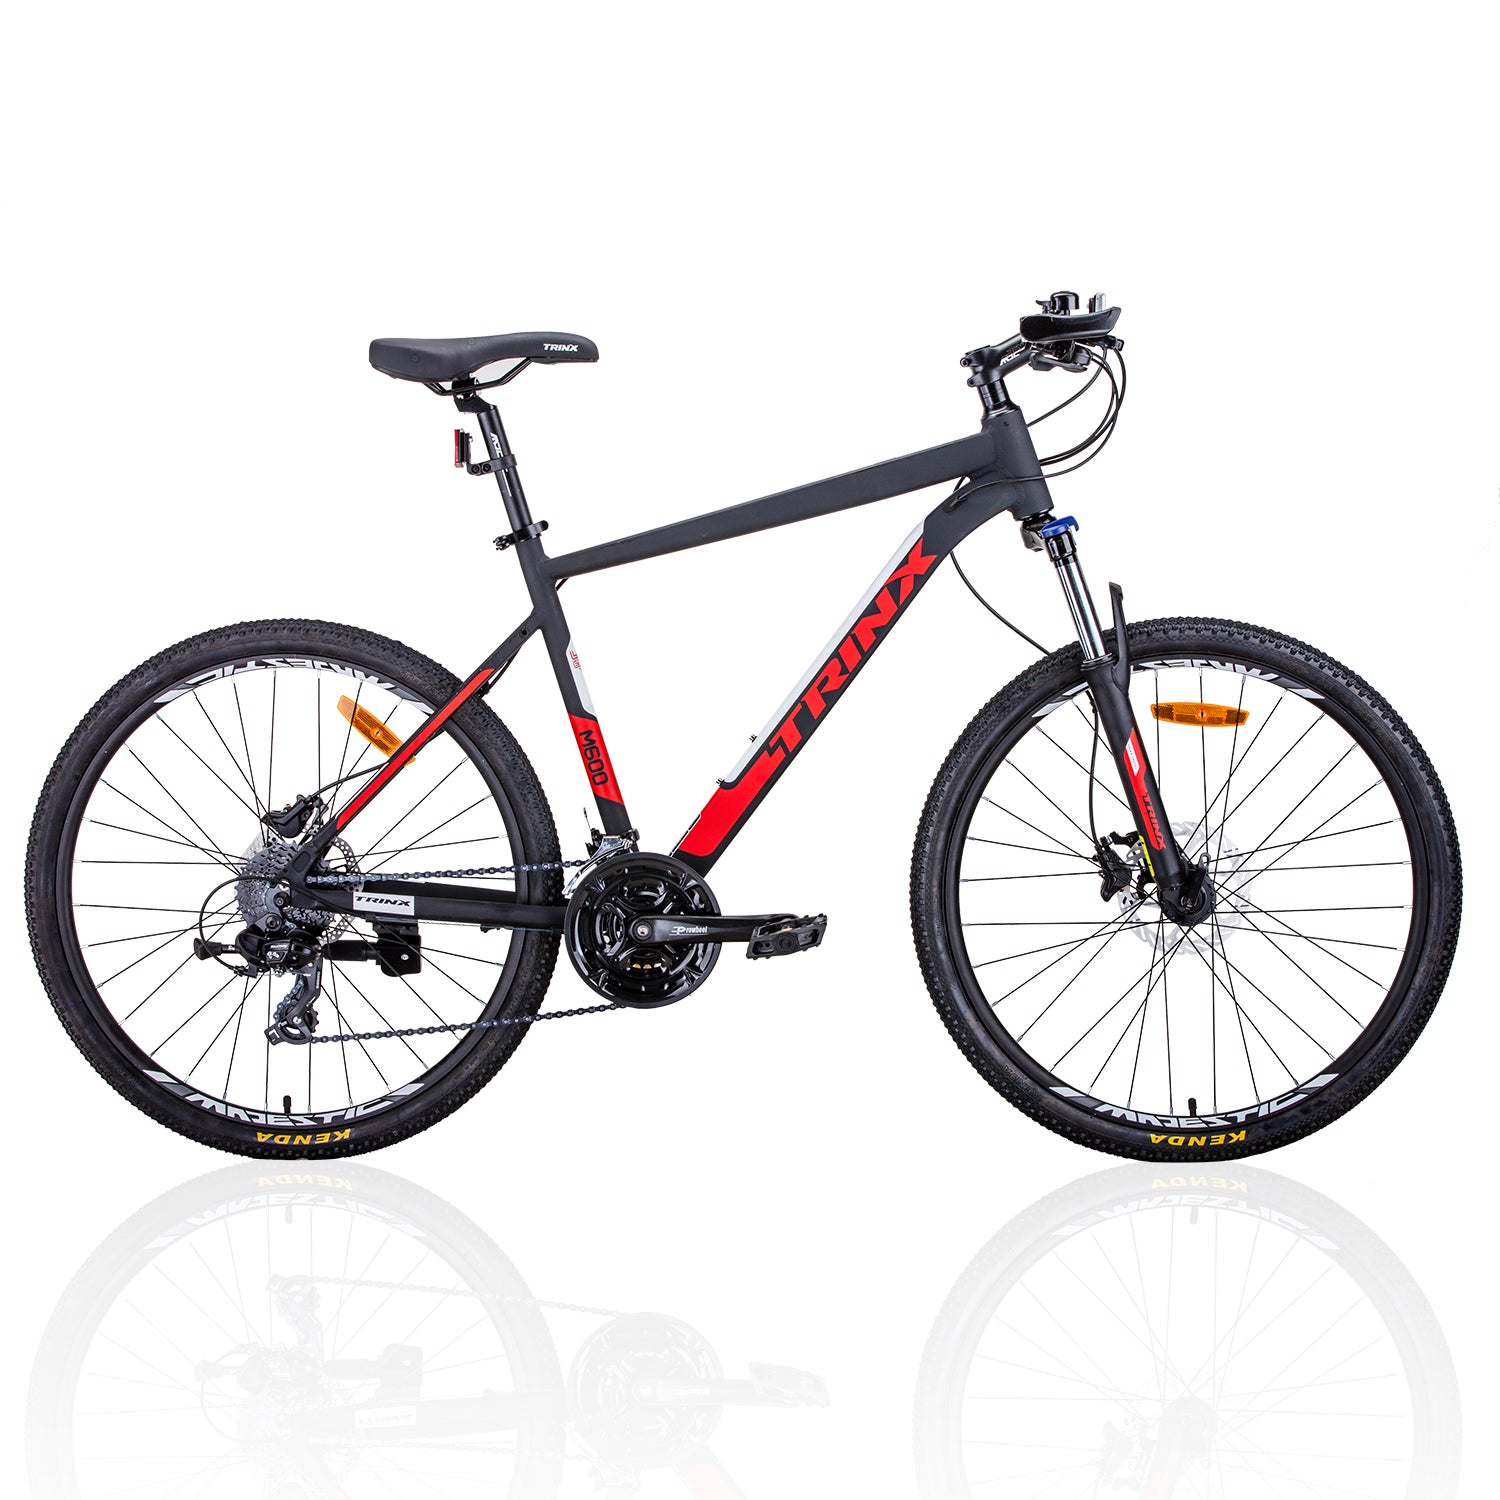 Trinx M600 Mountain Bike 24 Speed MTB Bicycle 19 Inches Frame Red